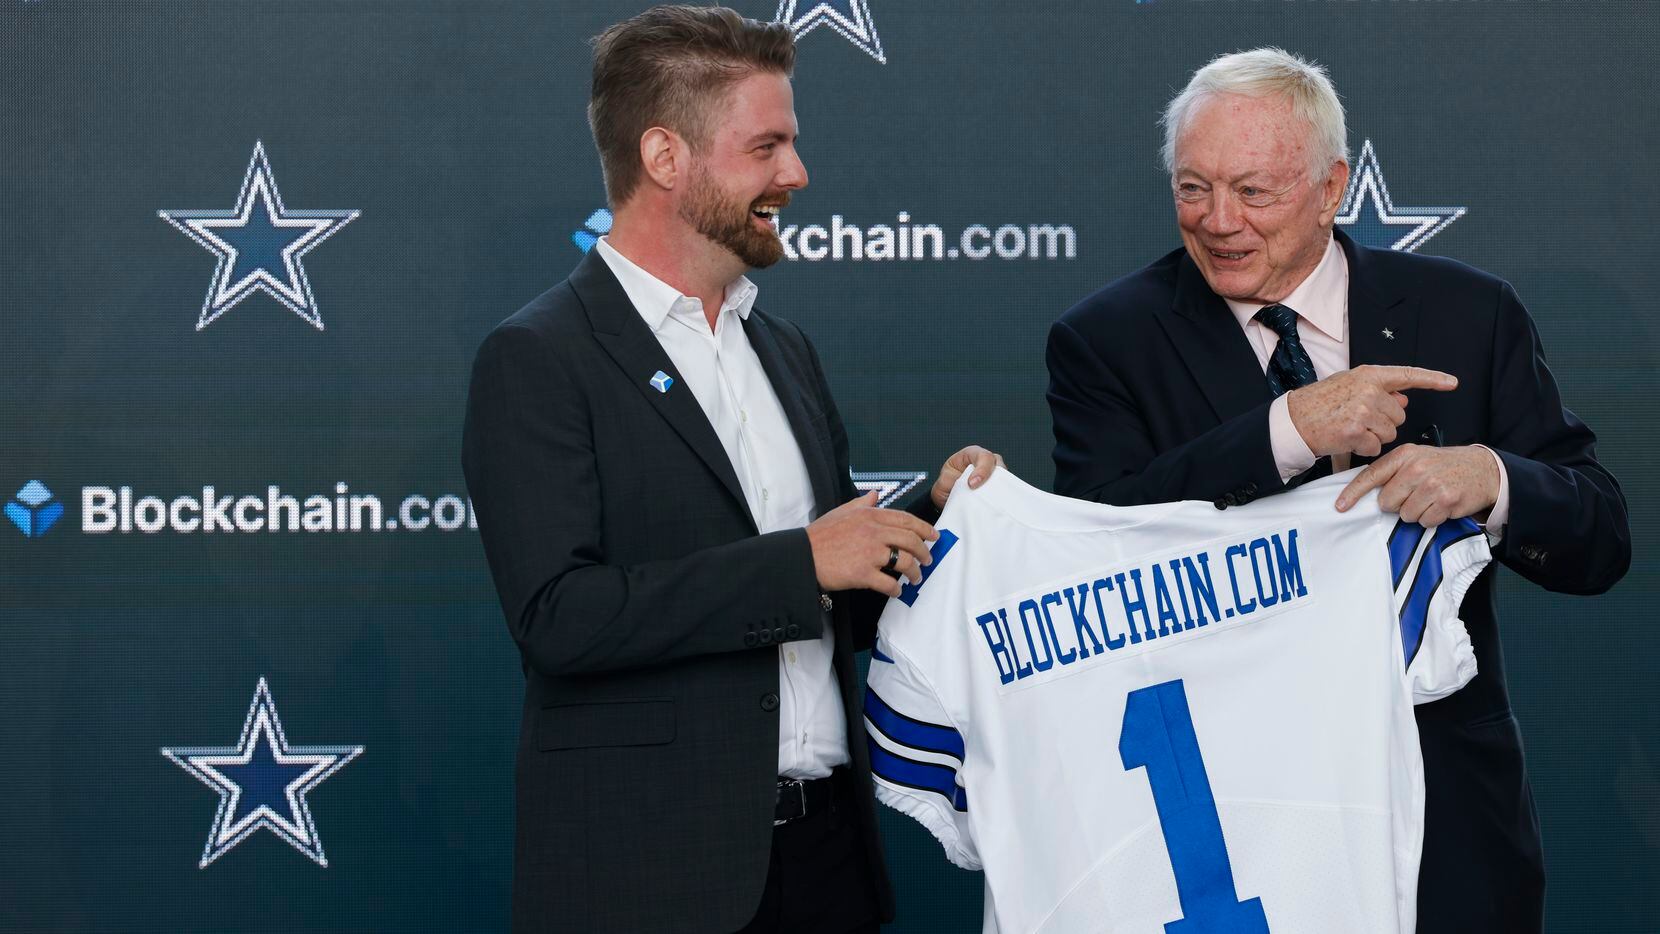 Dallas Cowboys strike deal with Blockchain.com in NFL's first crypto  partnership